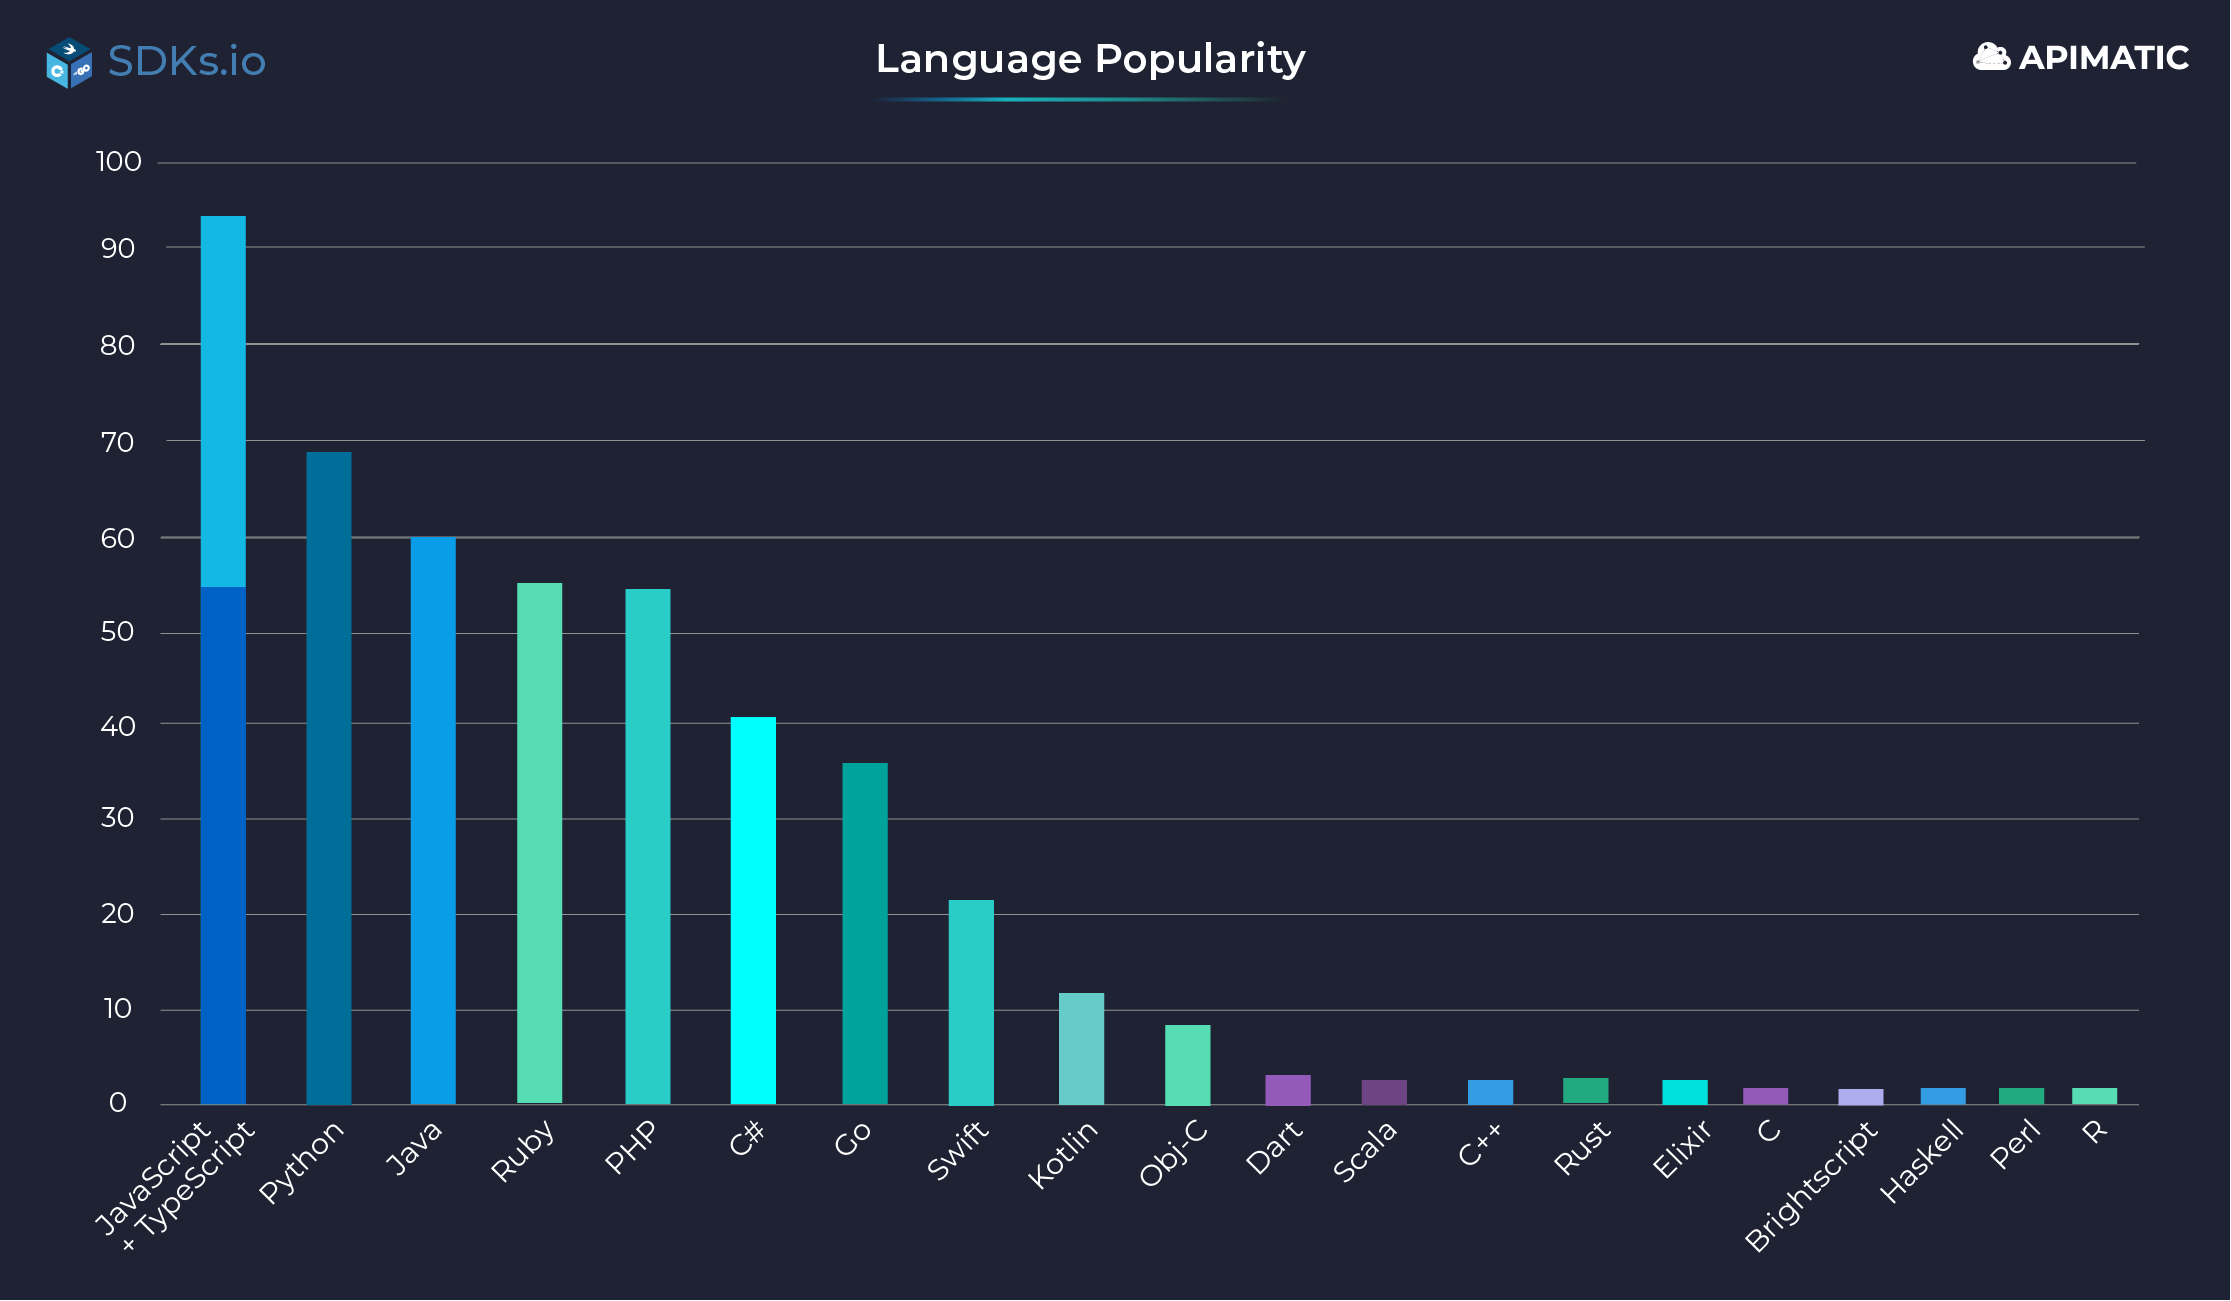 SDK research on 100 companies and language popularity